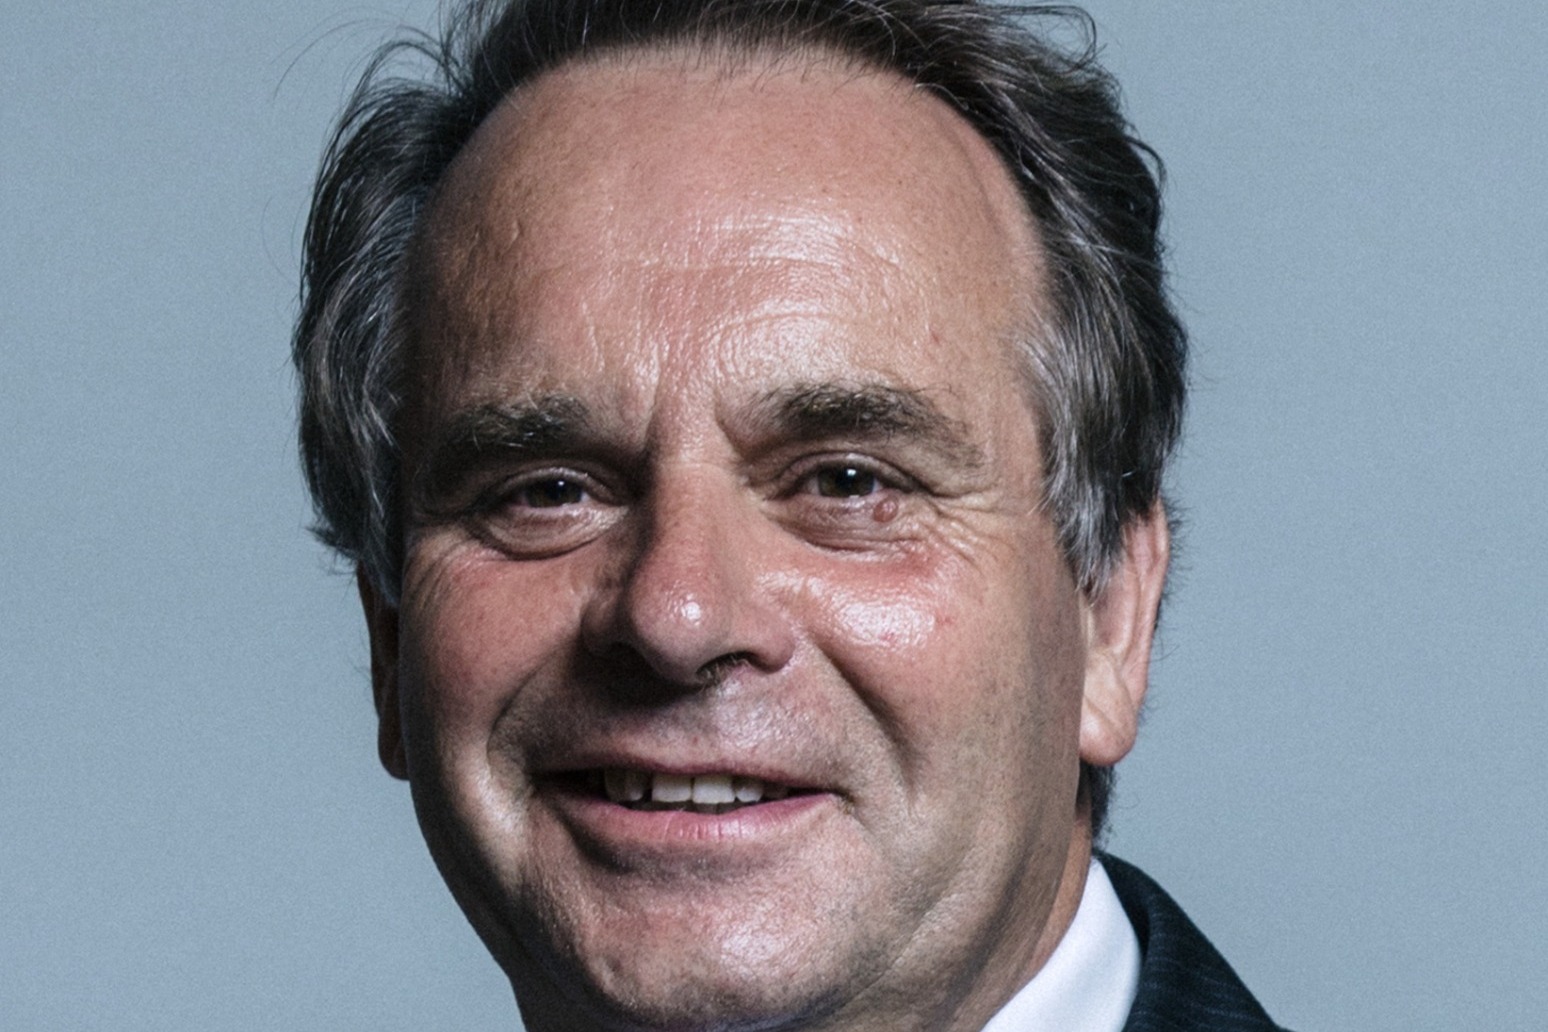 Neil Parish Resigns As Conservative MP over Porn Allegations 